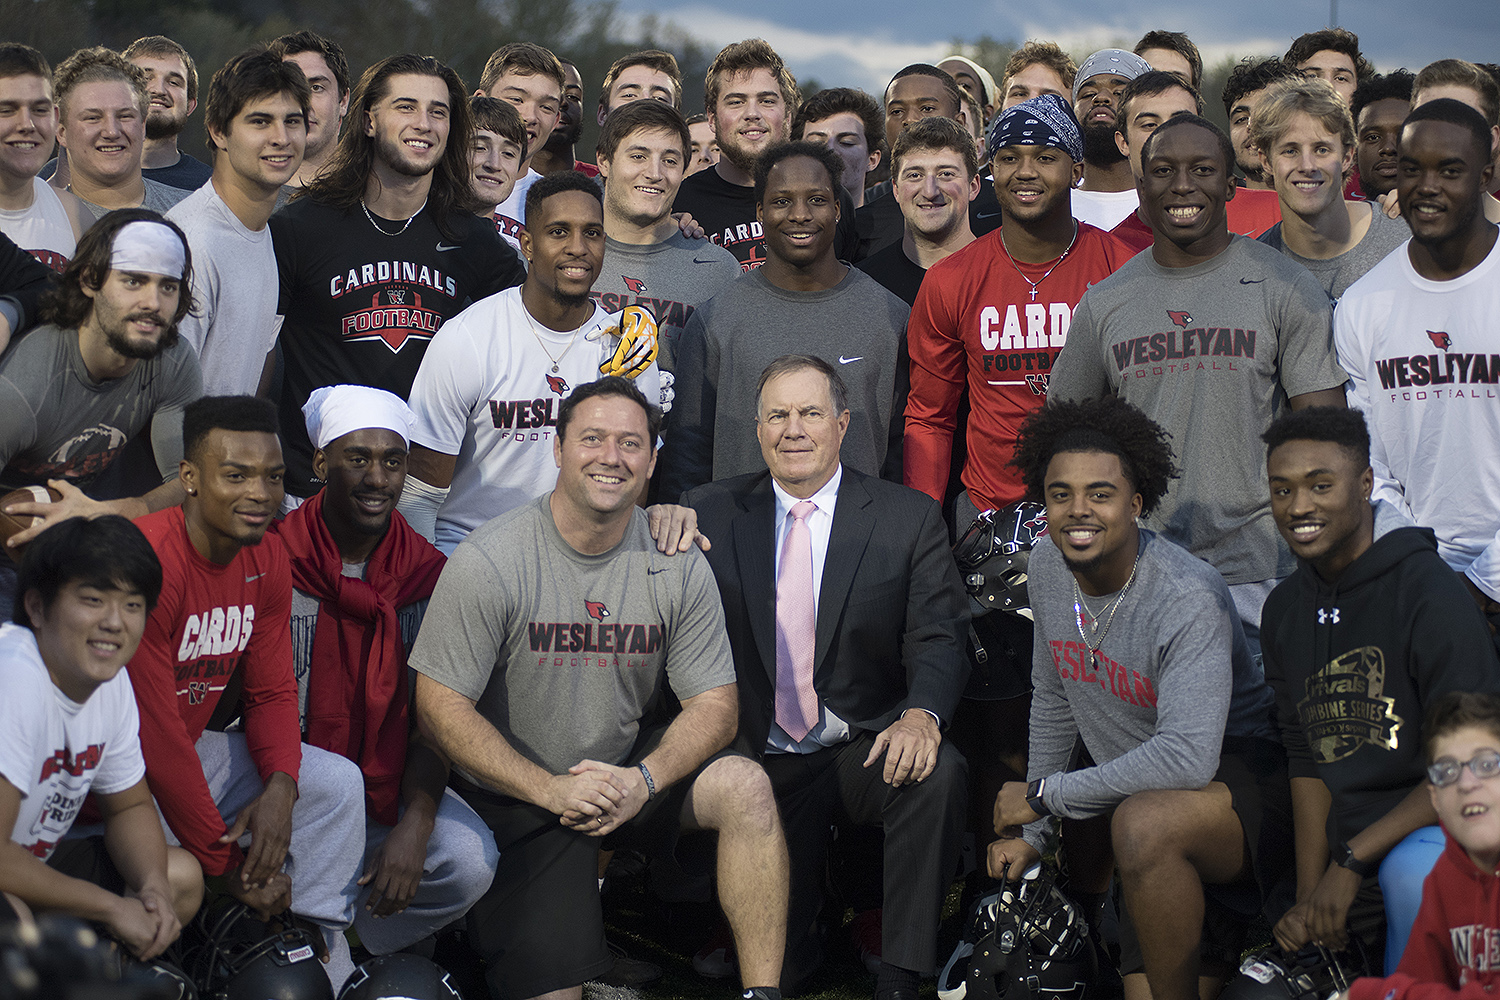 Belichick posed for photos with Head Coach Dan DiCenzo and the Wesleyan football team.